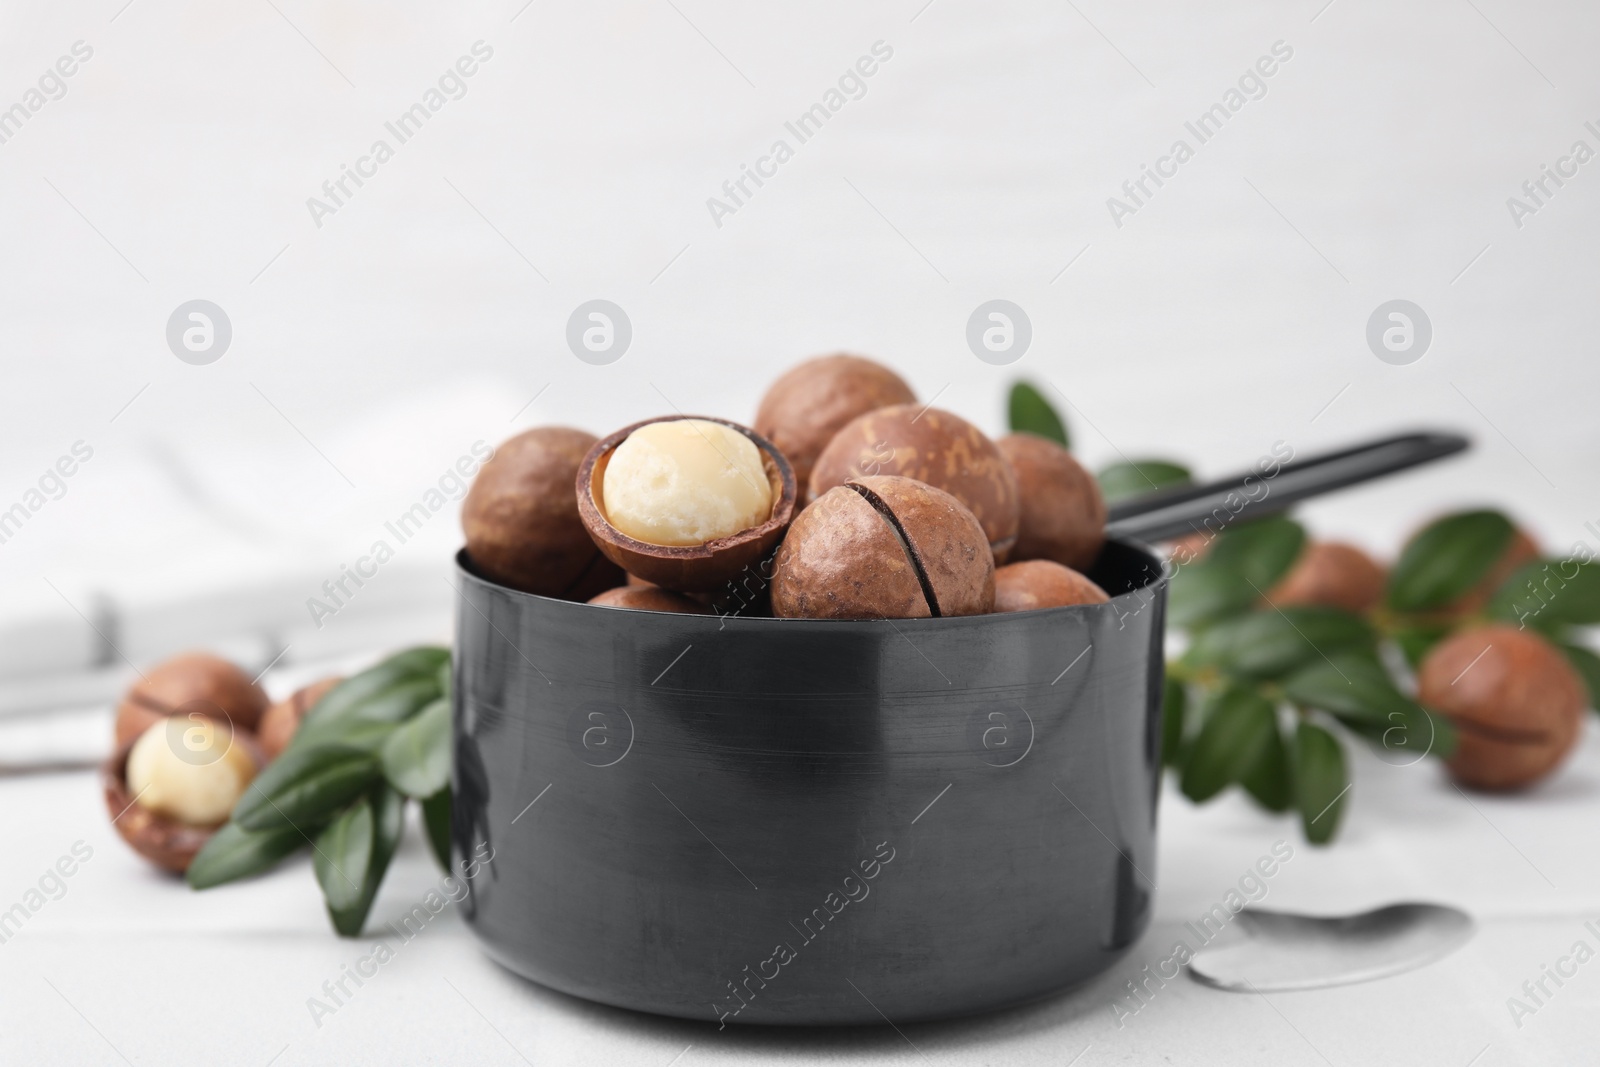 Photo of Tasty organic Macadamia nuts in small saucepan on white table